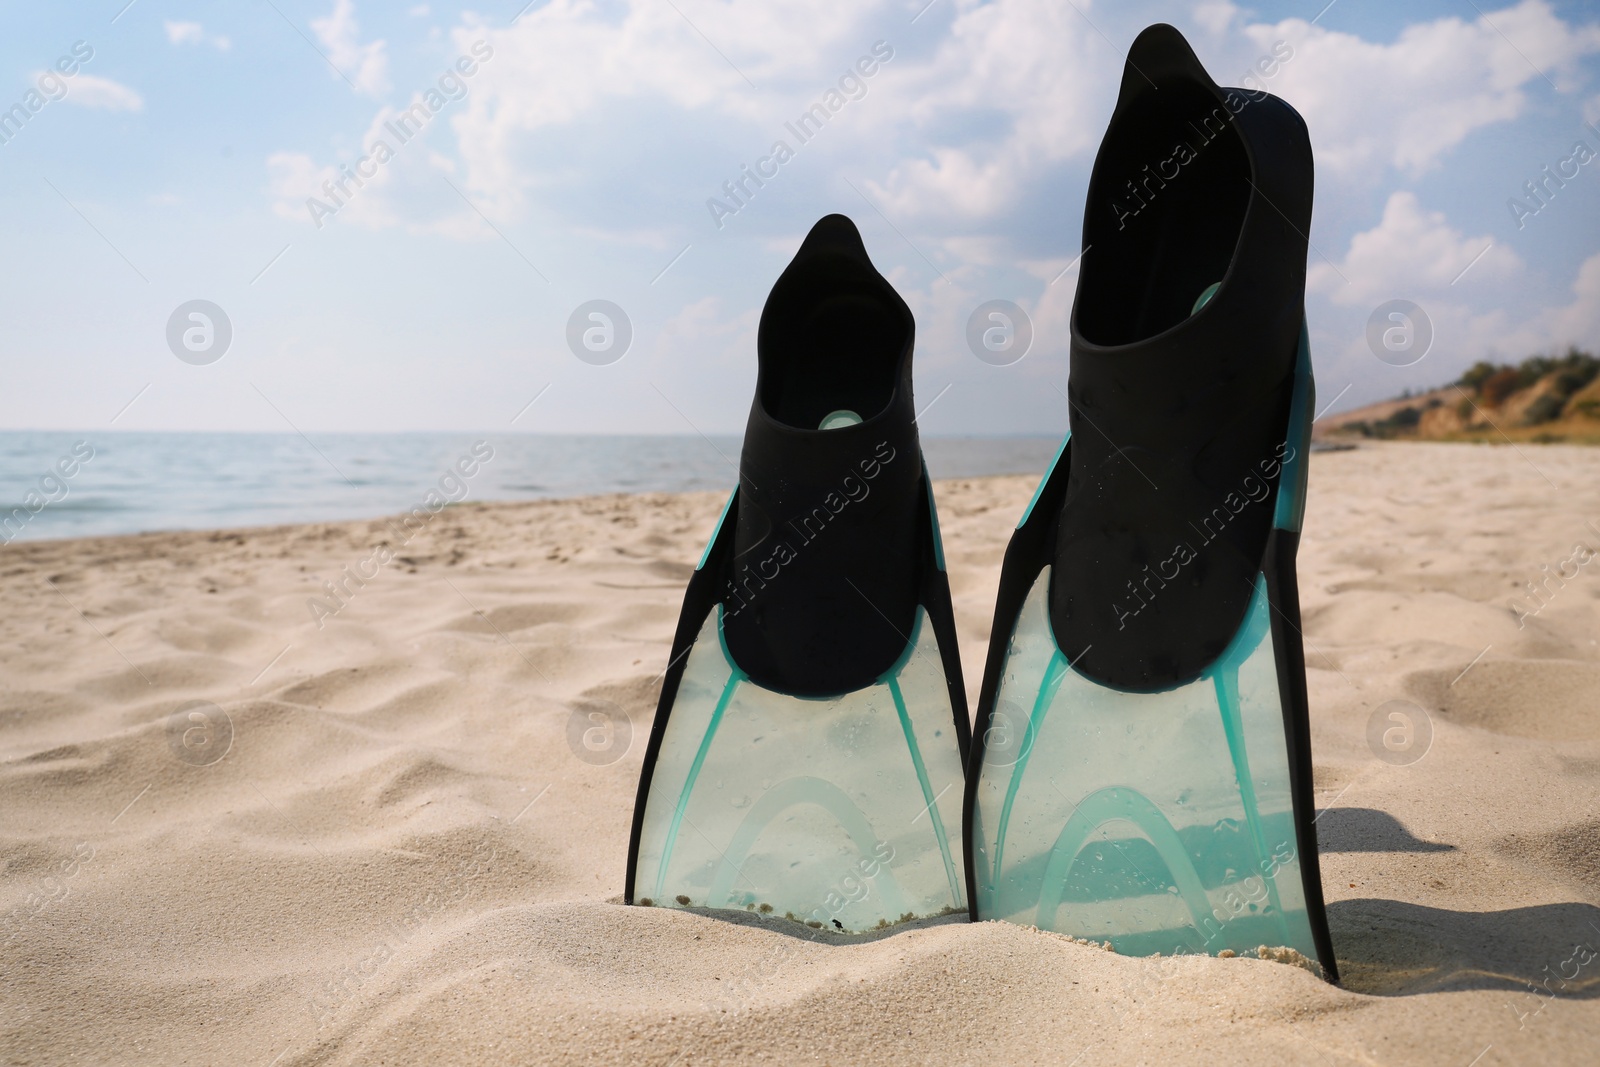 Photo of Pair of turquoise flippers on sandy beach near sea. Space for text